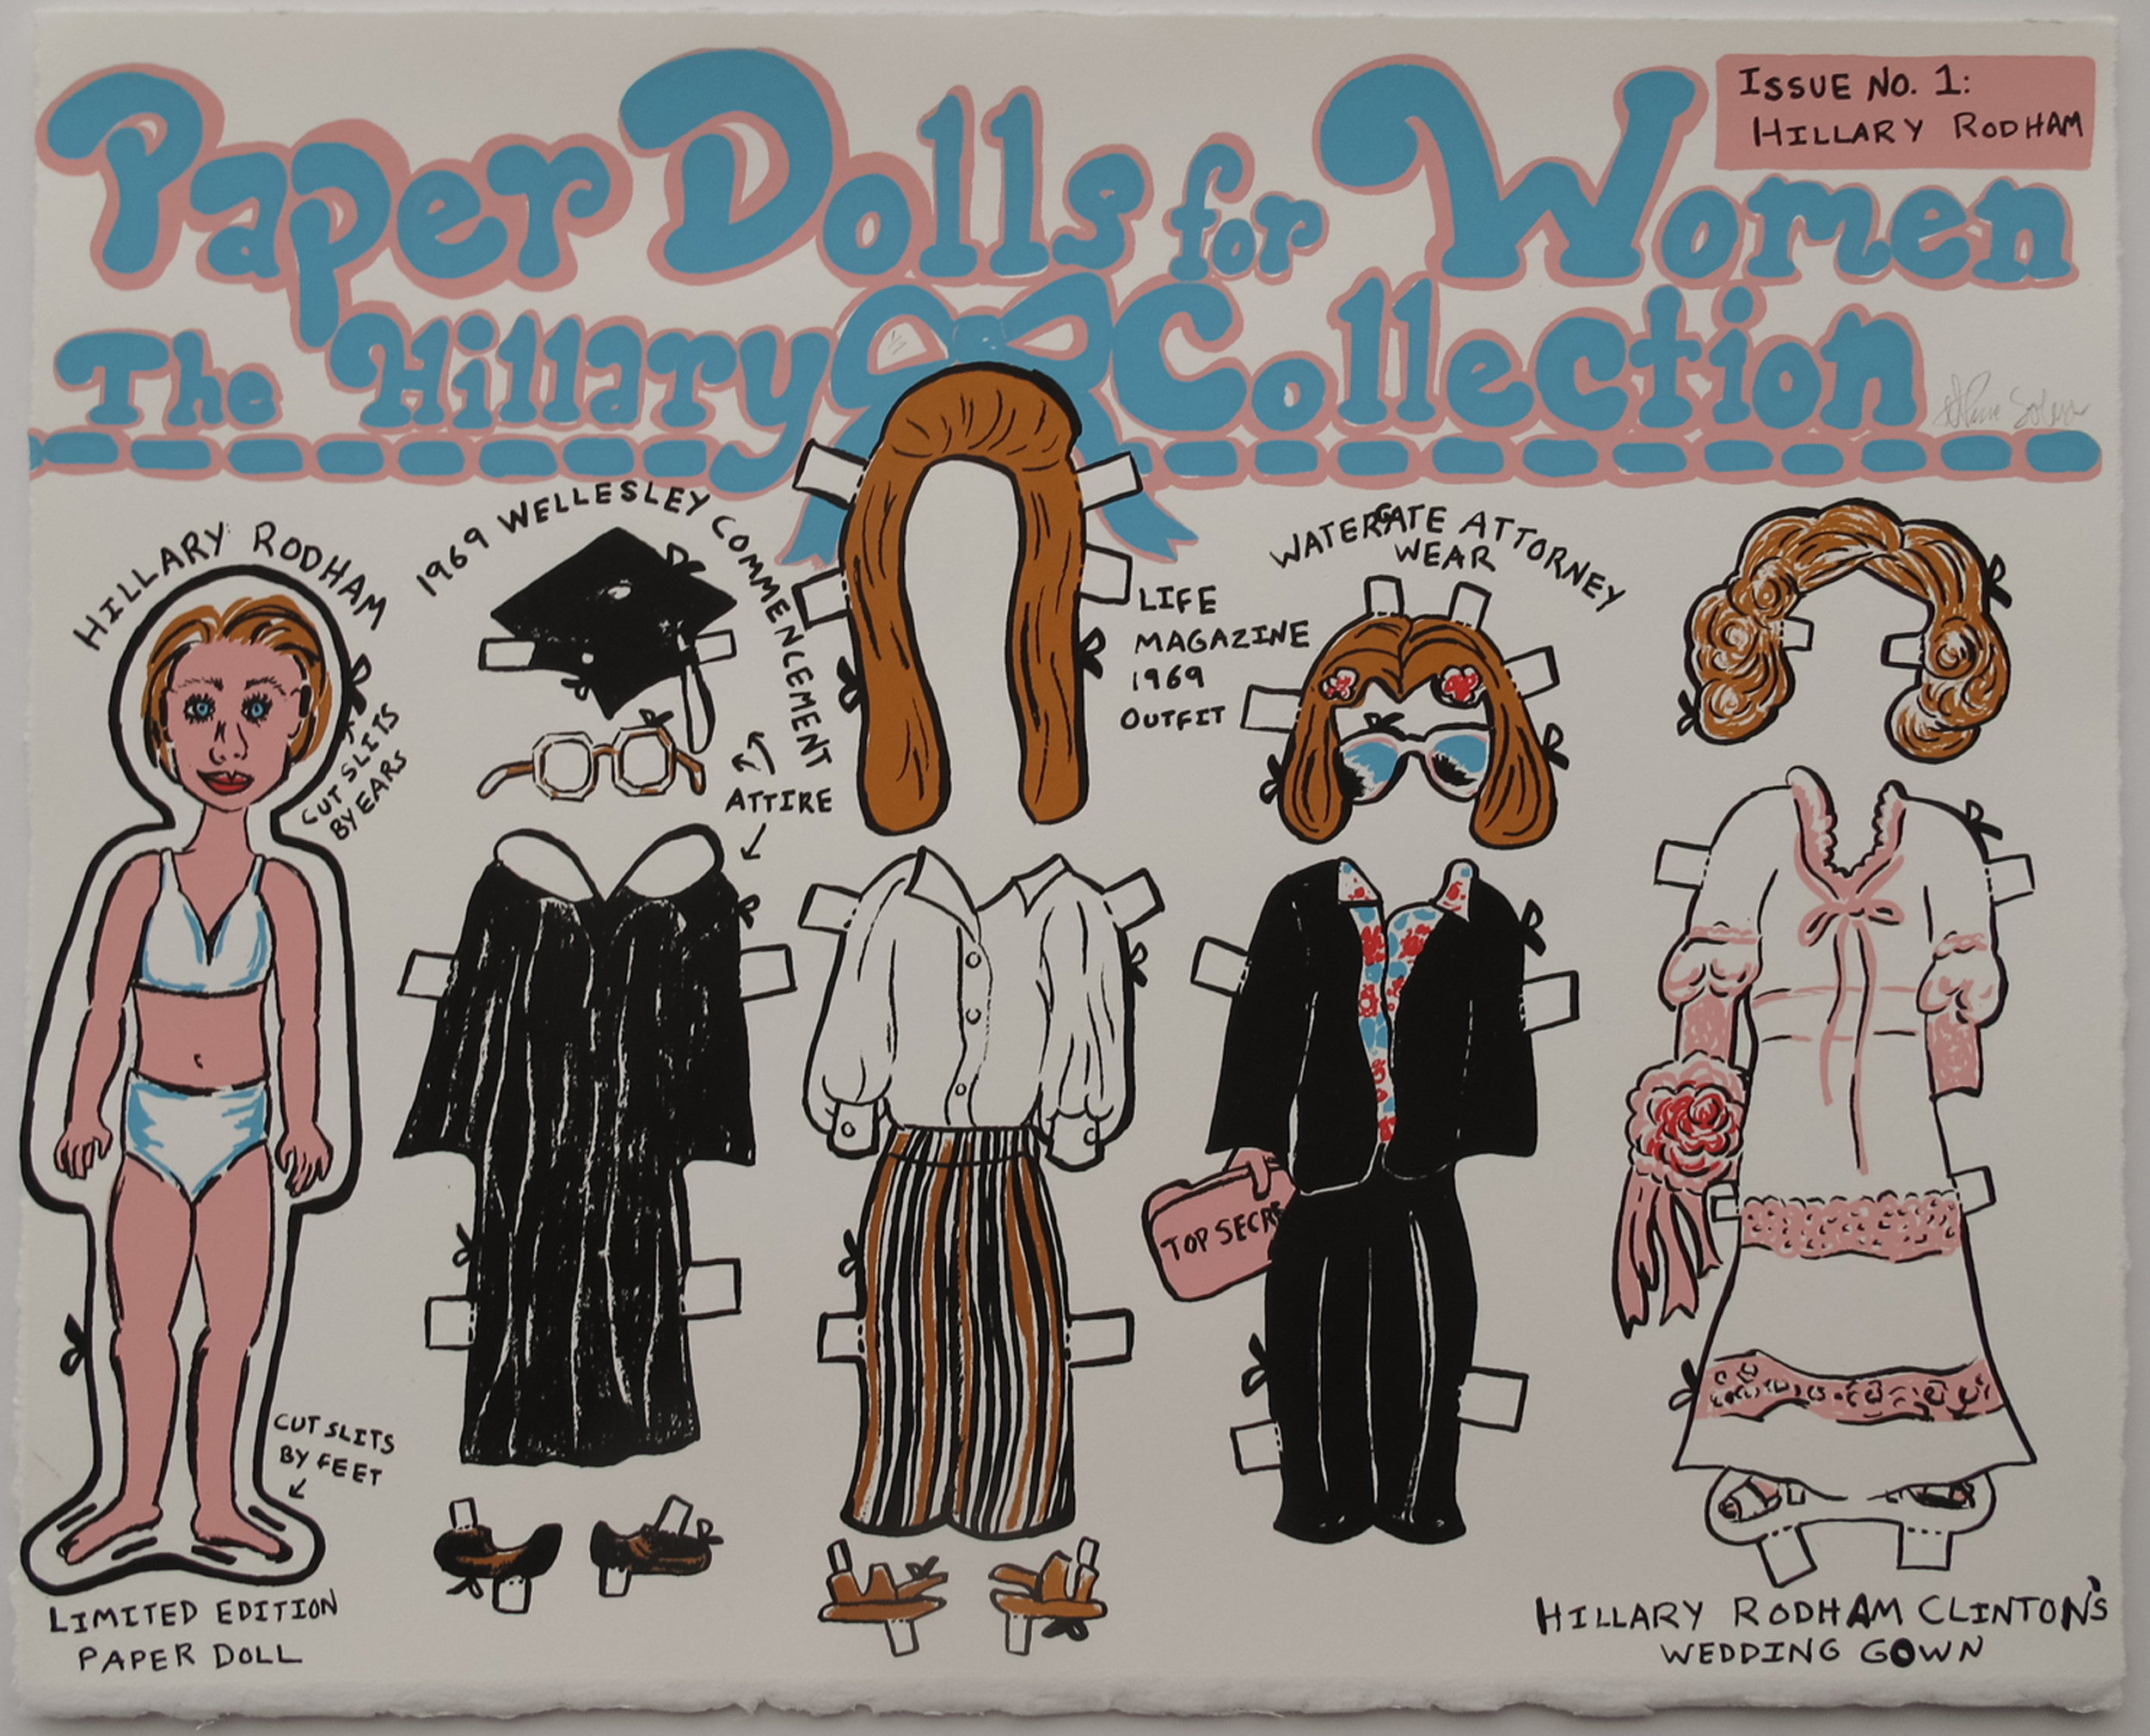 Nicole Soley, Paper Dolls for Women: The Hillary Collection, Issue No. 1, screenprint